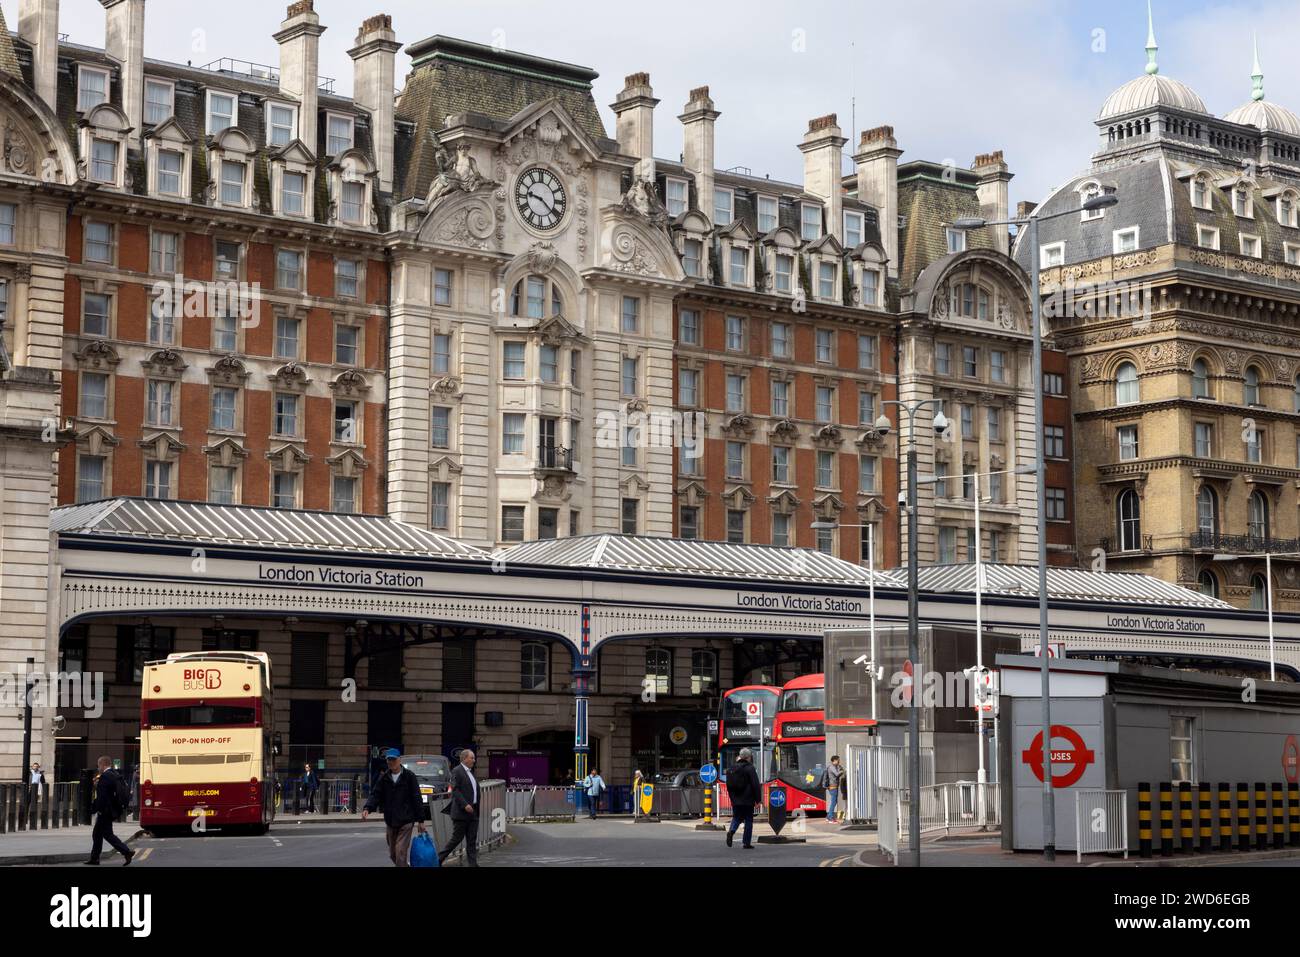 Elegant exterior of Victoria Railway Station in Central London. The bus station is in the foreground. Stock Photo